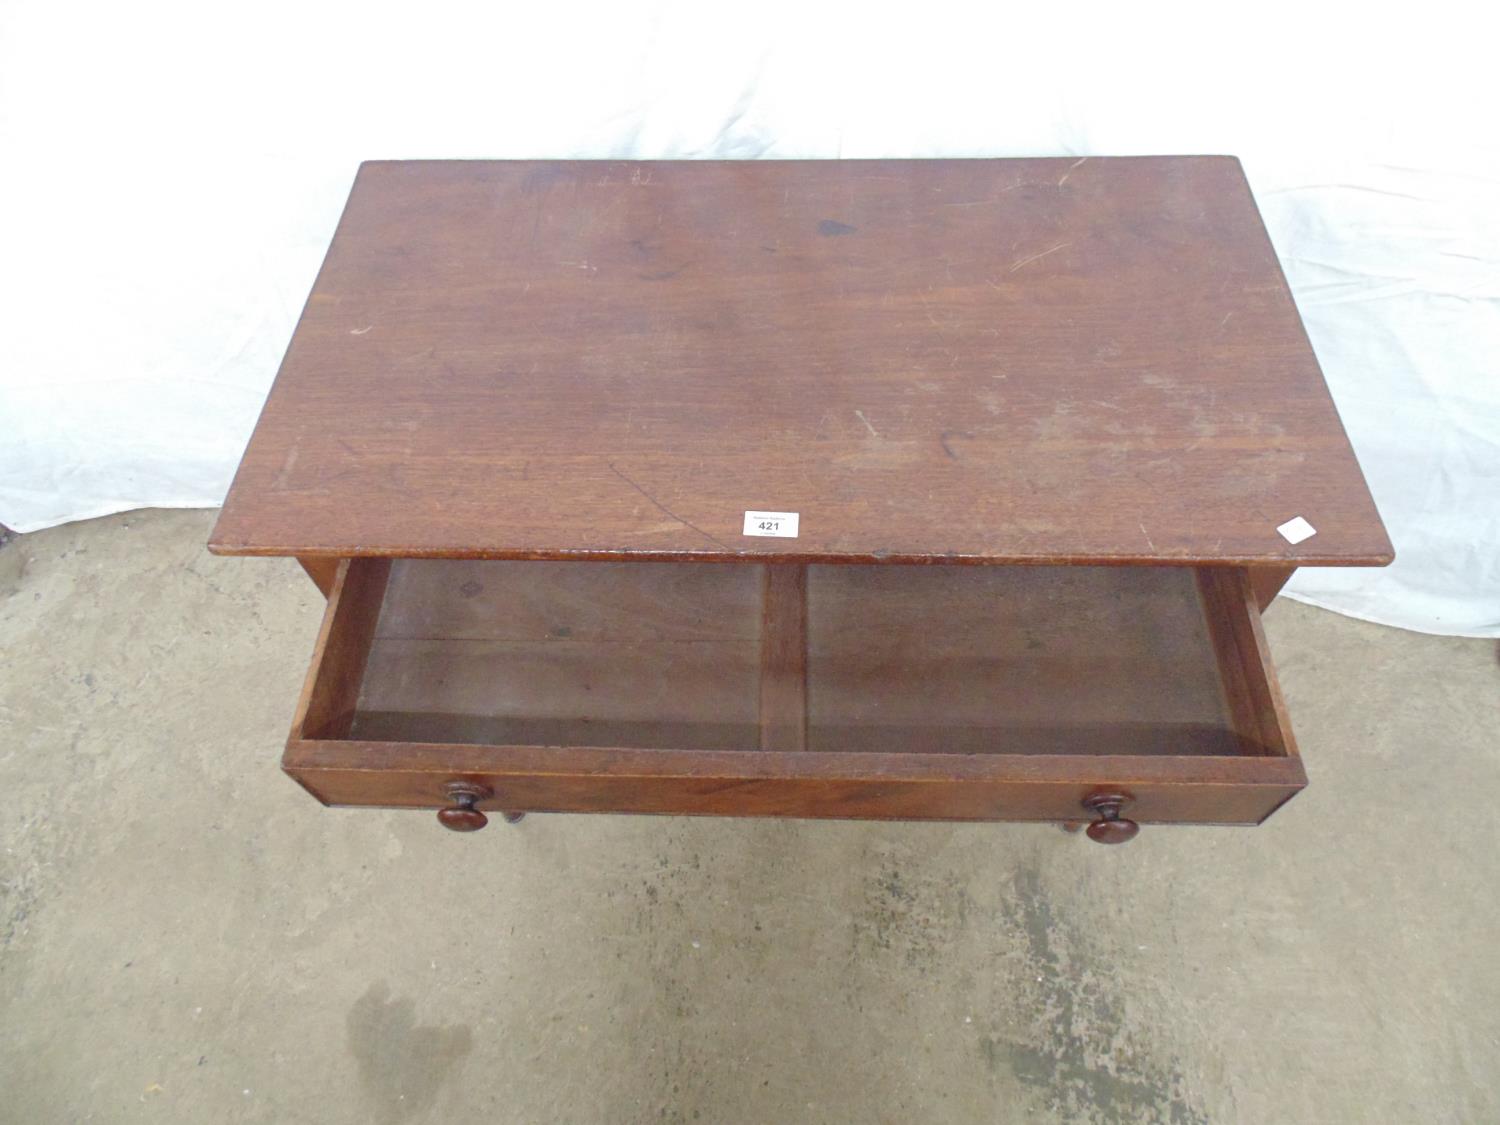 Mahogany single drawer side table with wooden turned handles, standing on four turned legs - 84cm - Image 2 of 3